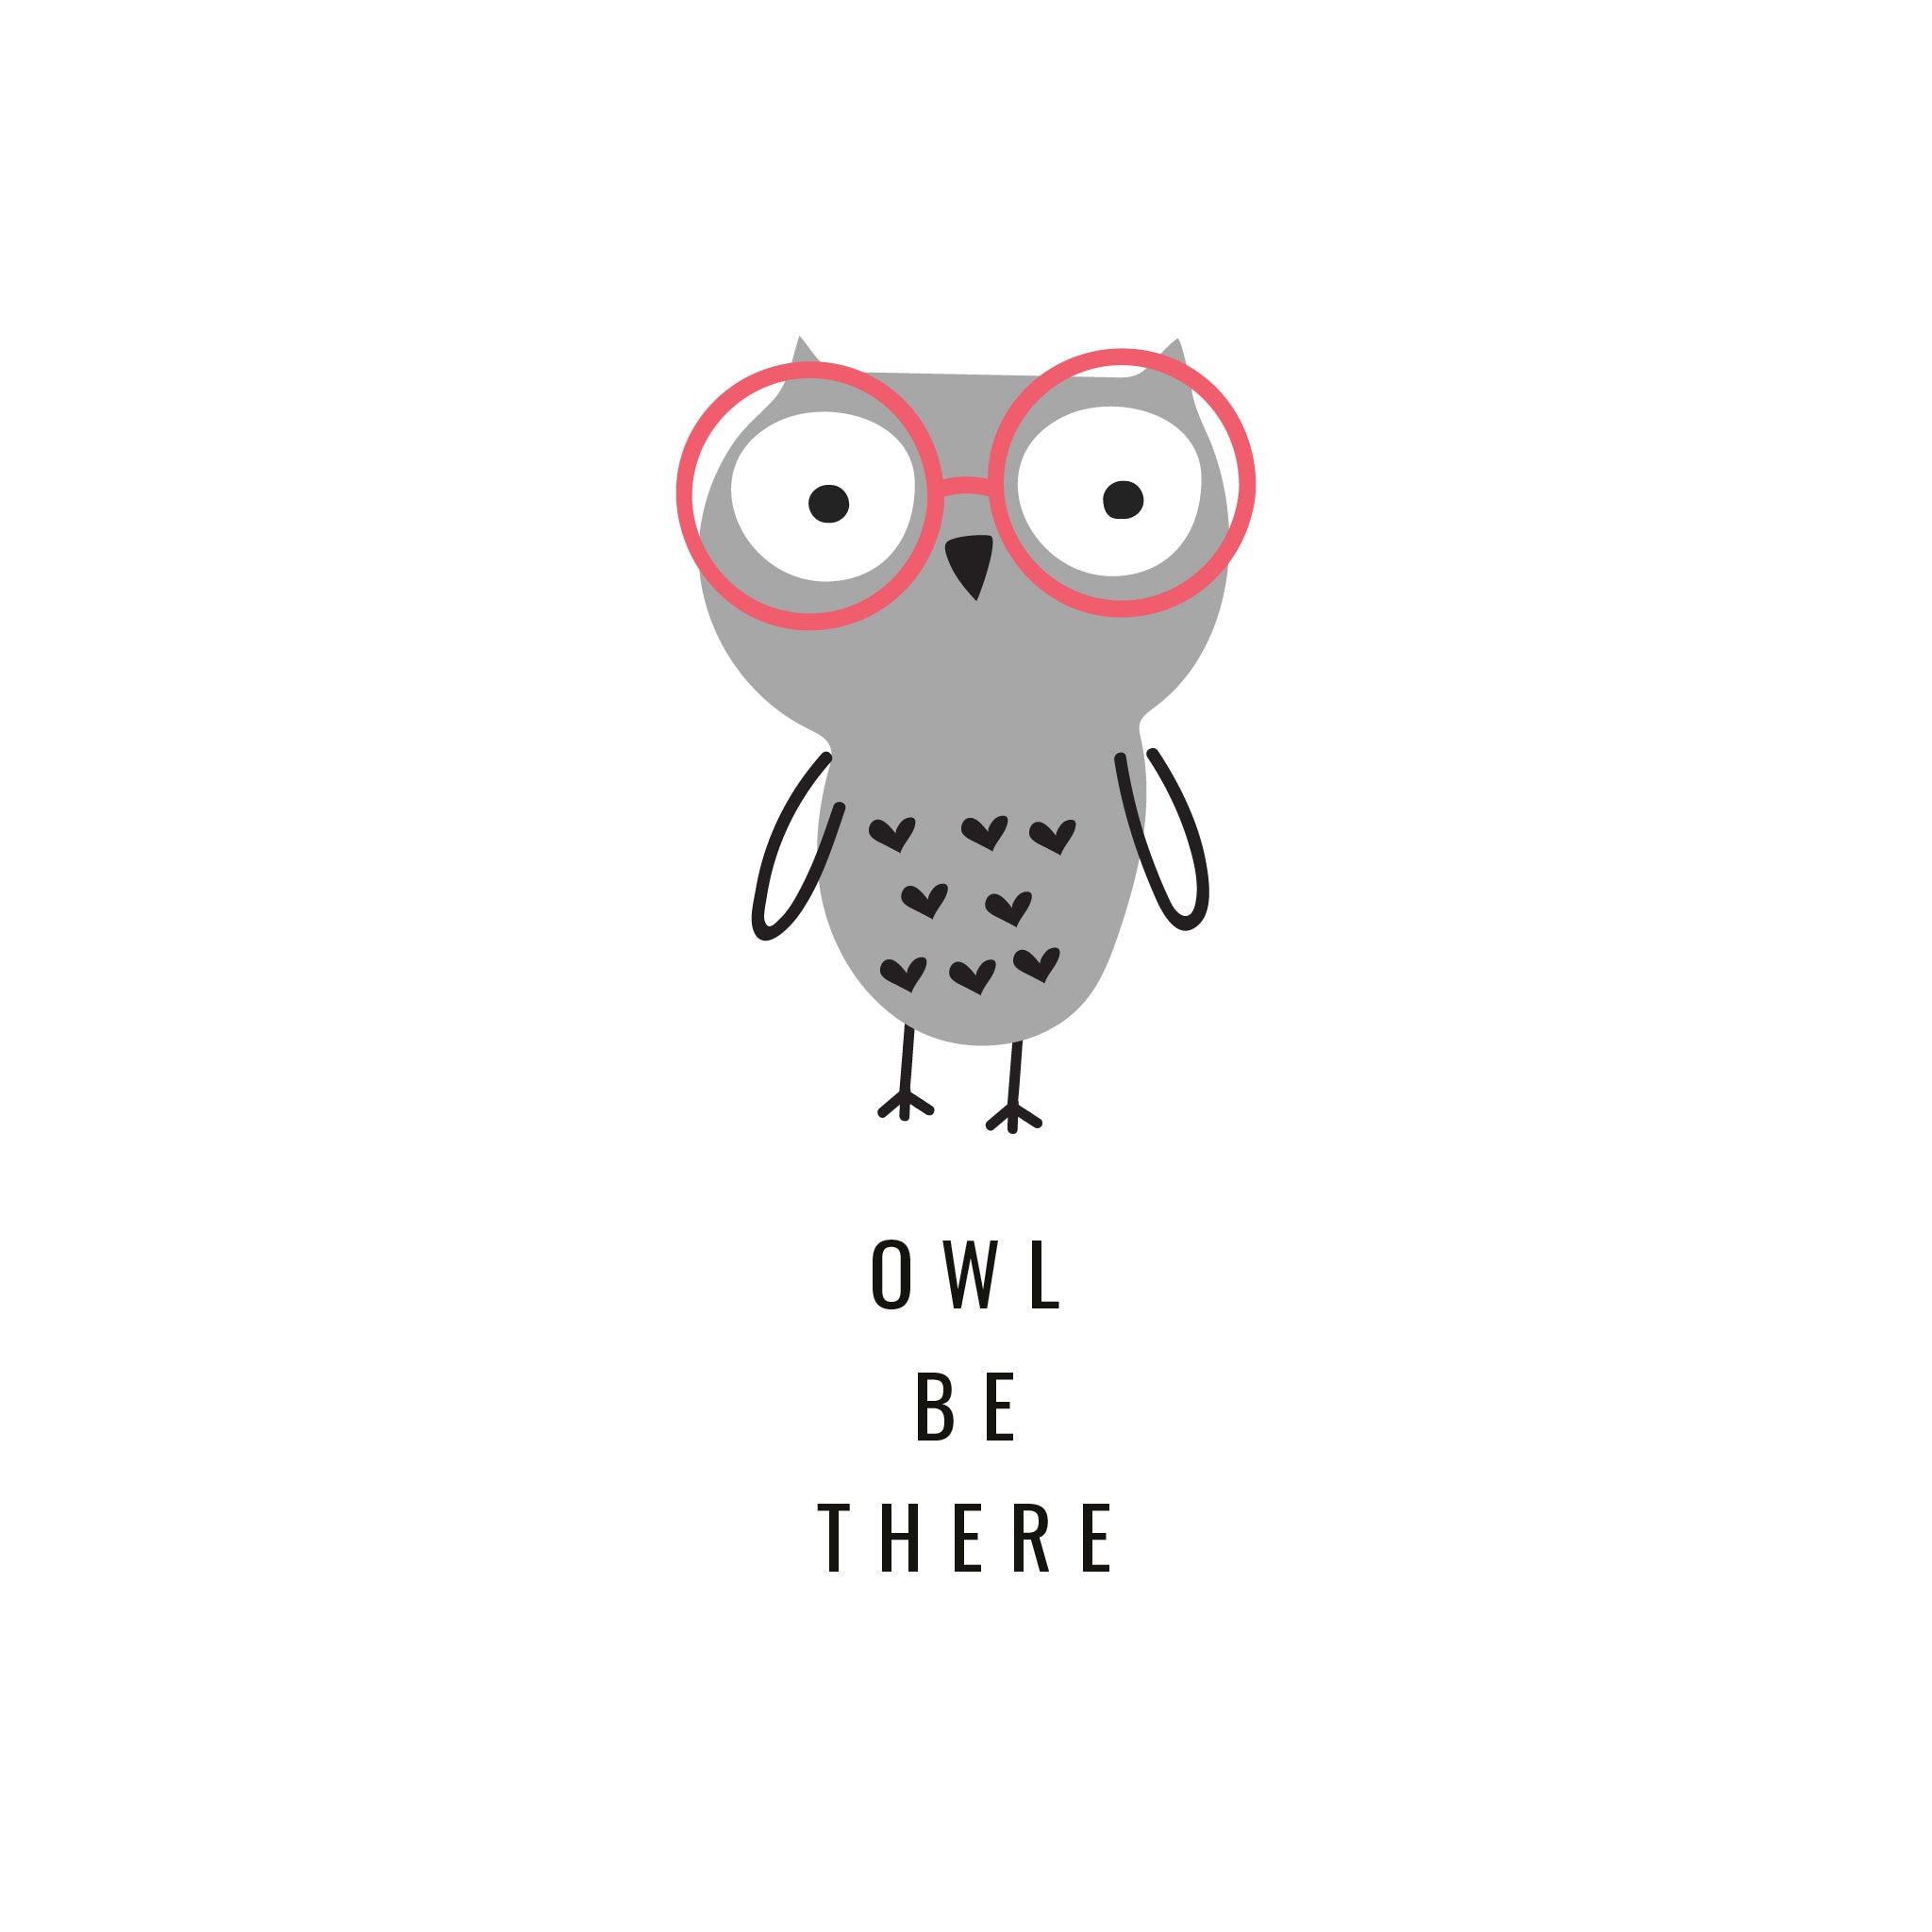 Instee Owl Be There T-shirt Unisex 100% Cotton